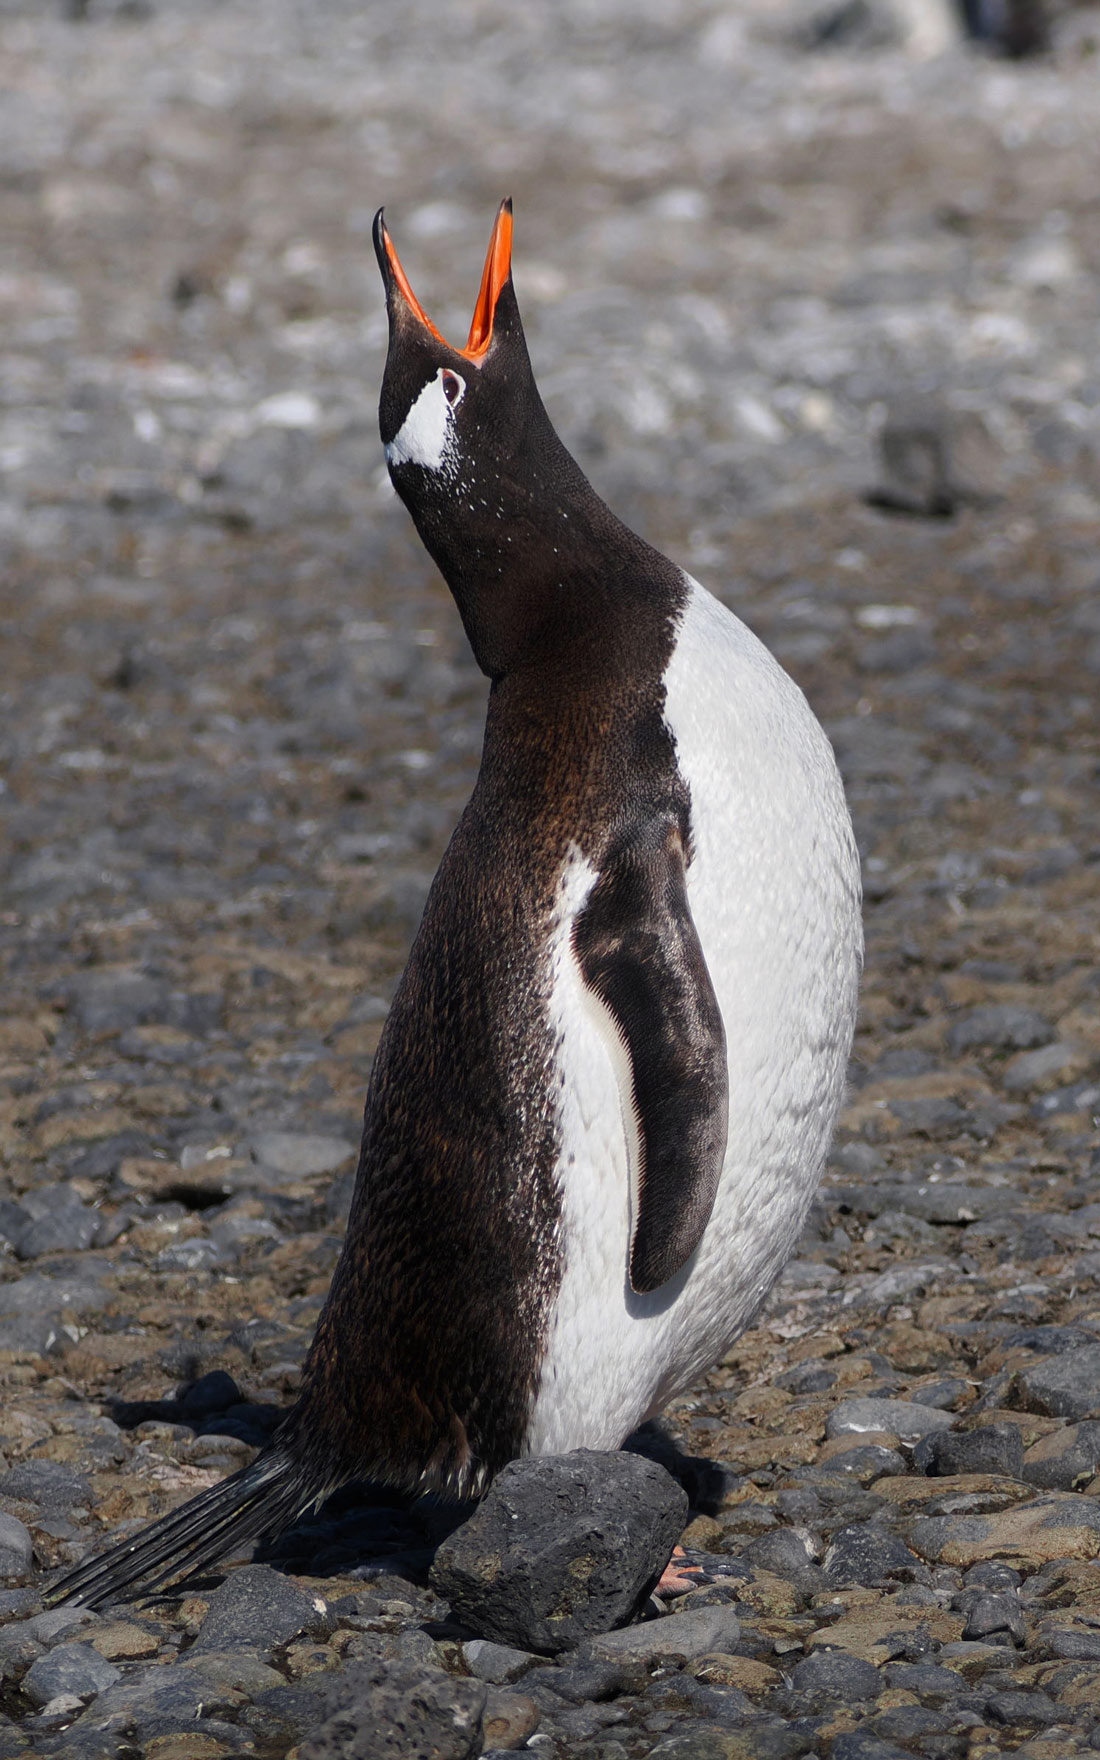 A penguin on a rocky beach throws its head back to call.